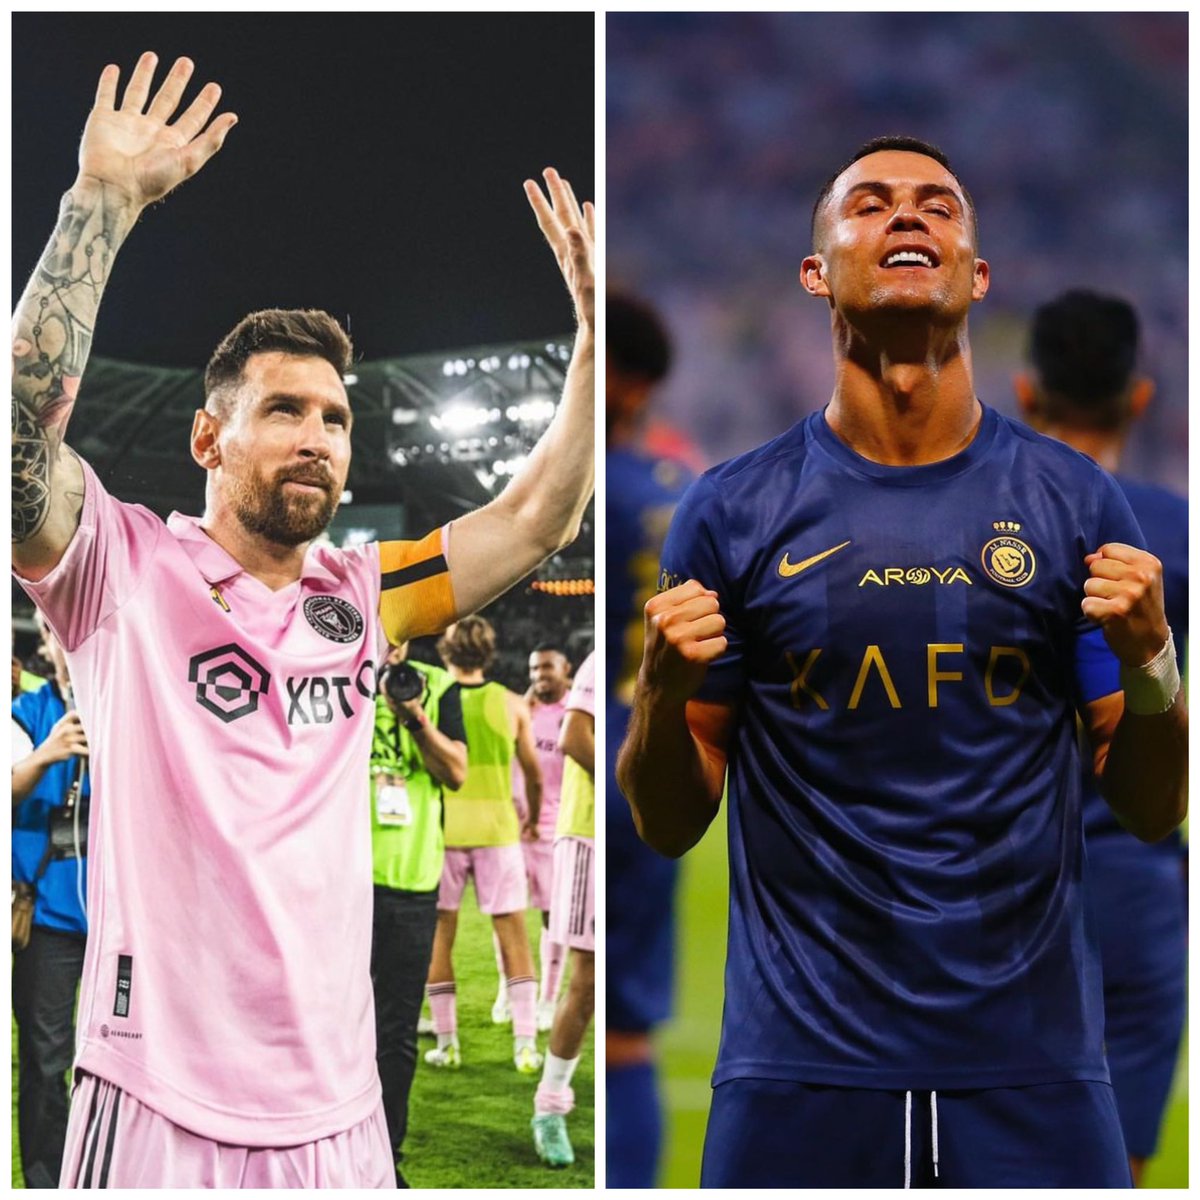 Lionel Messi and Cristiano Ronaldo are set to meet again on the pitch when Inter Miami CF face Al Nassr in the Riyadh Season Cup friendly, set for February of 2024 in the Kingdom of Saudi Arabia. One last dance. 😍